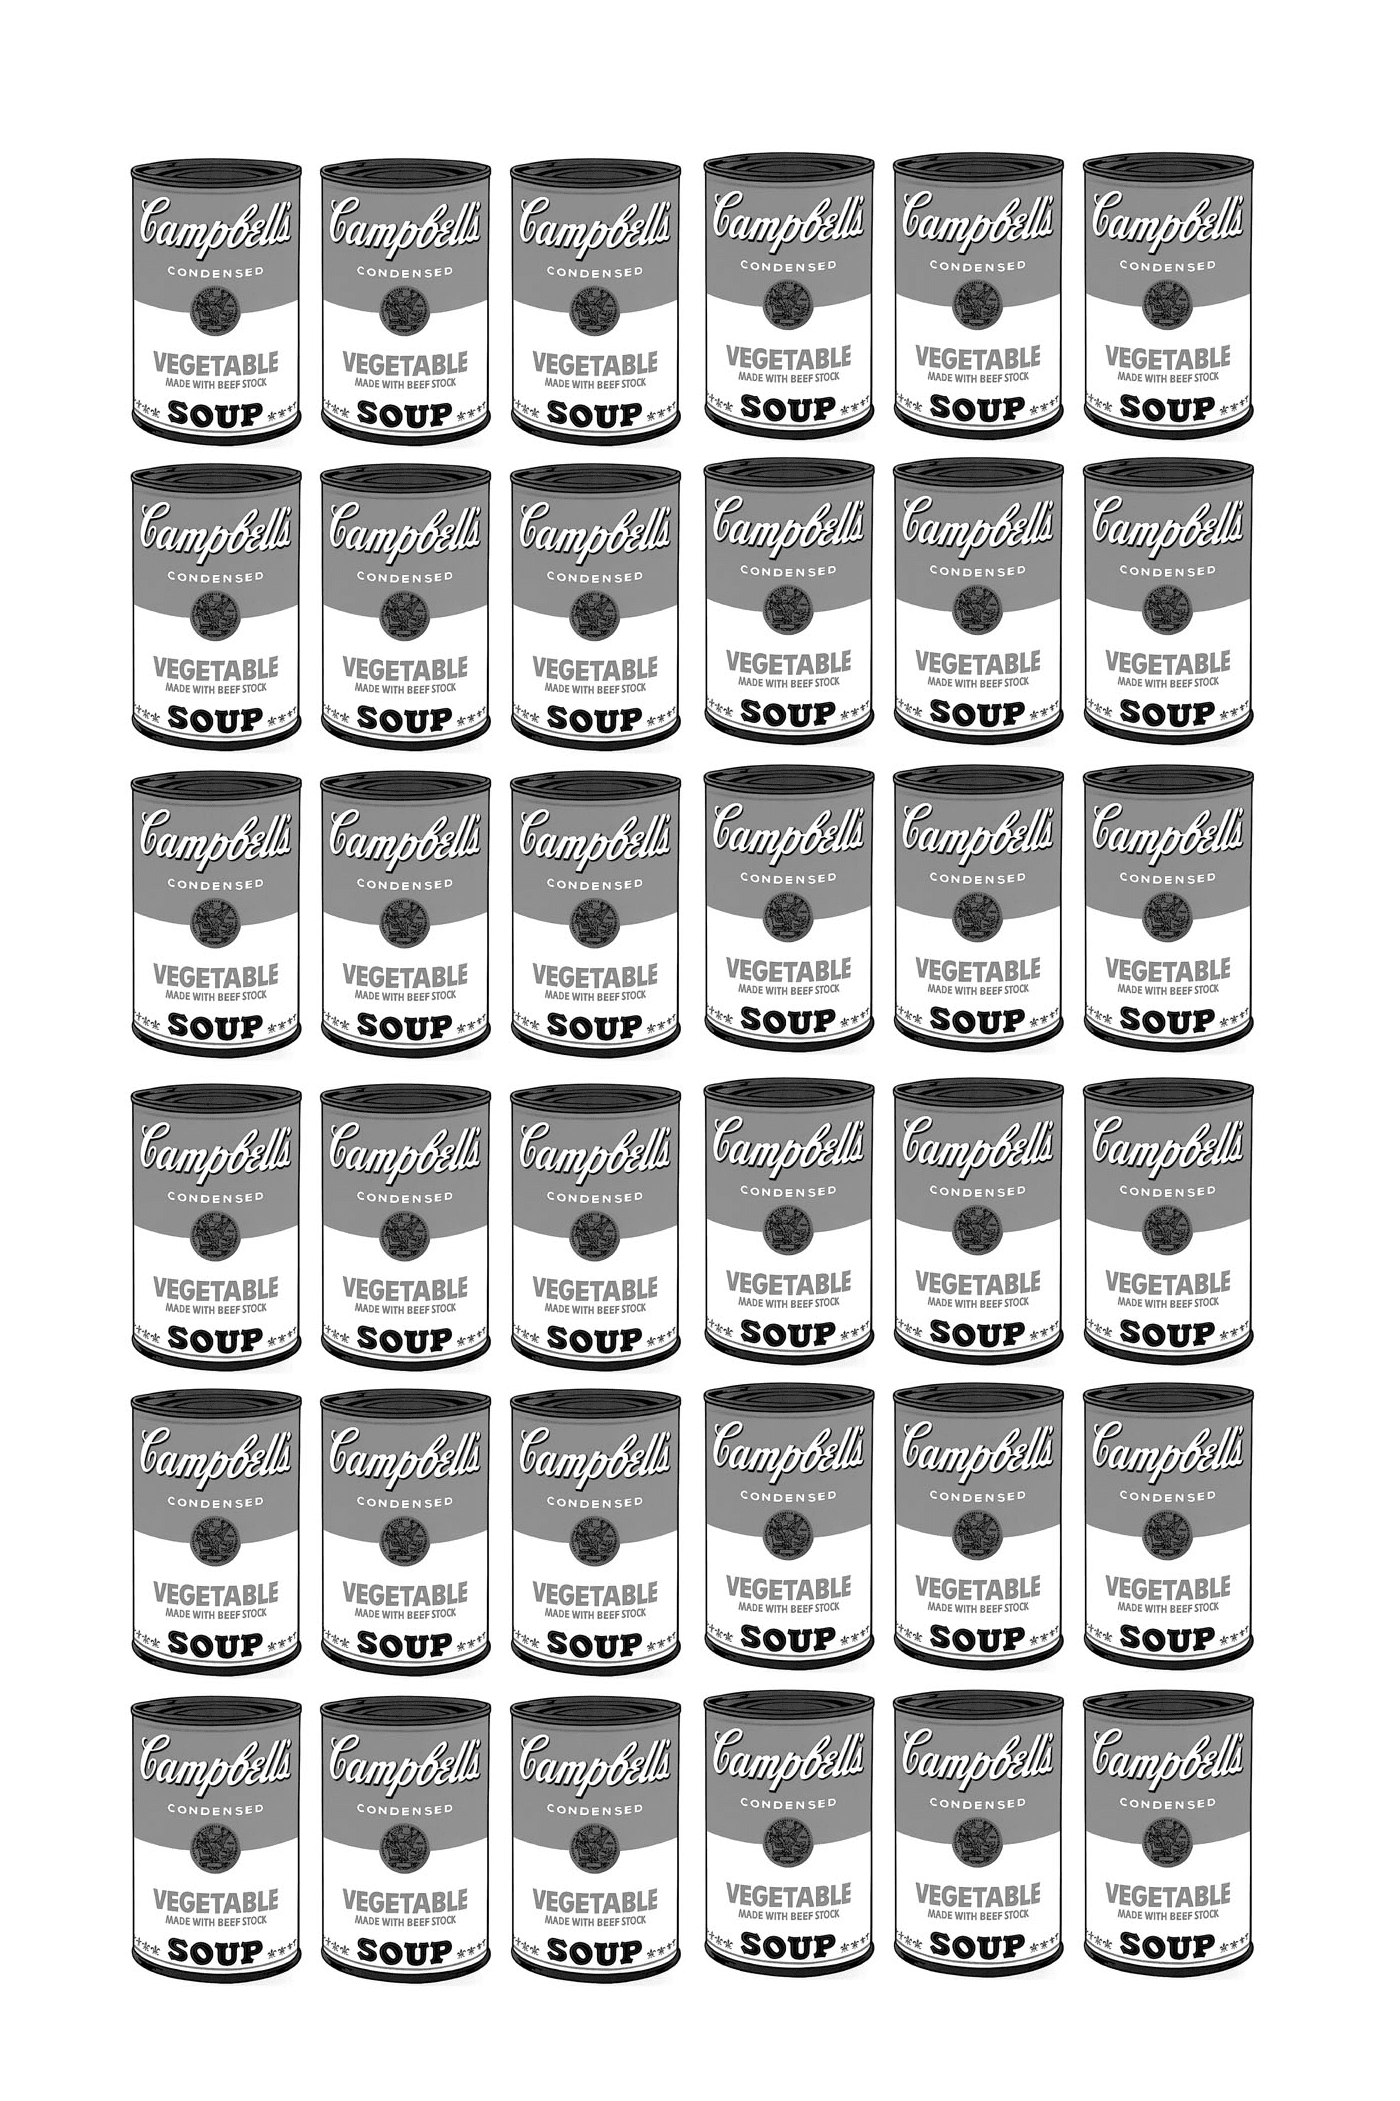  a series of Campbell soup boxes entirely black and white according to Warhol 